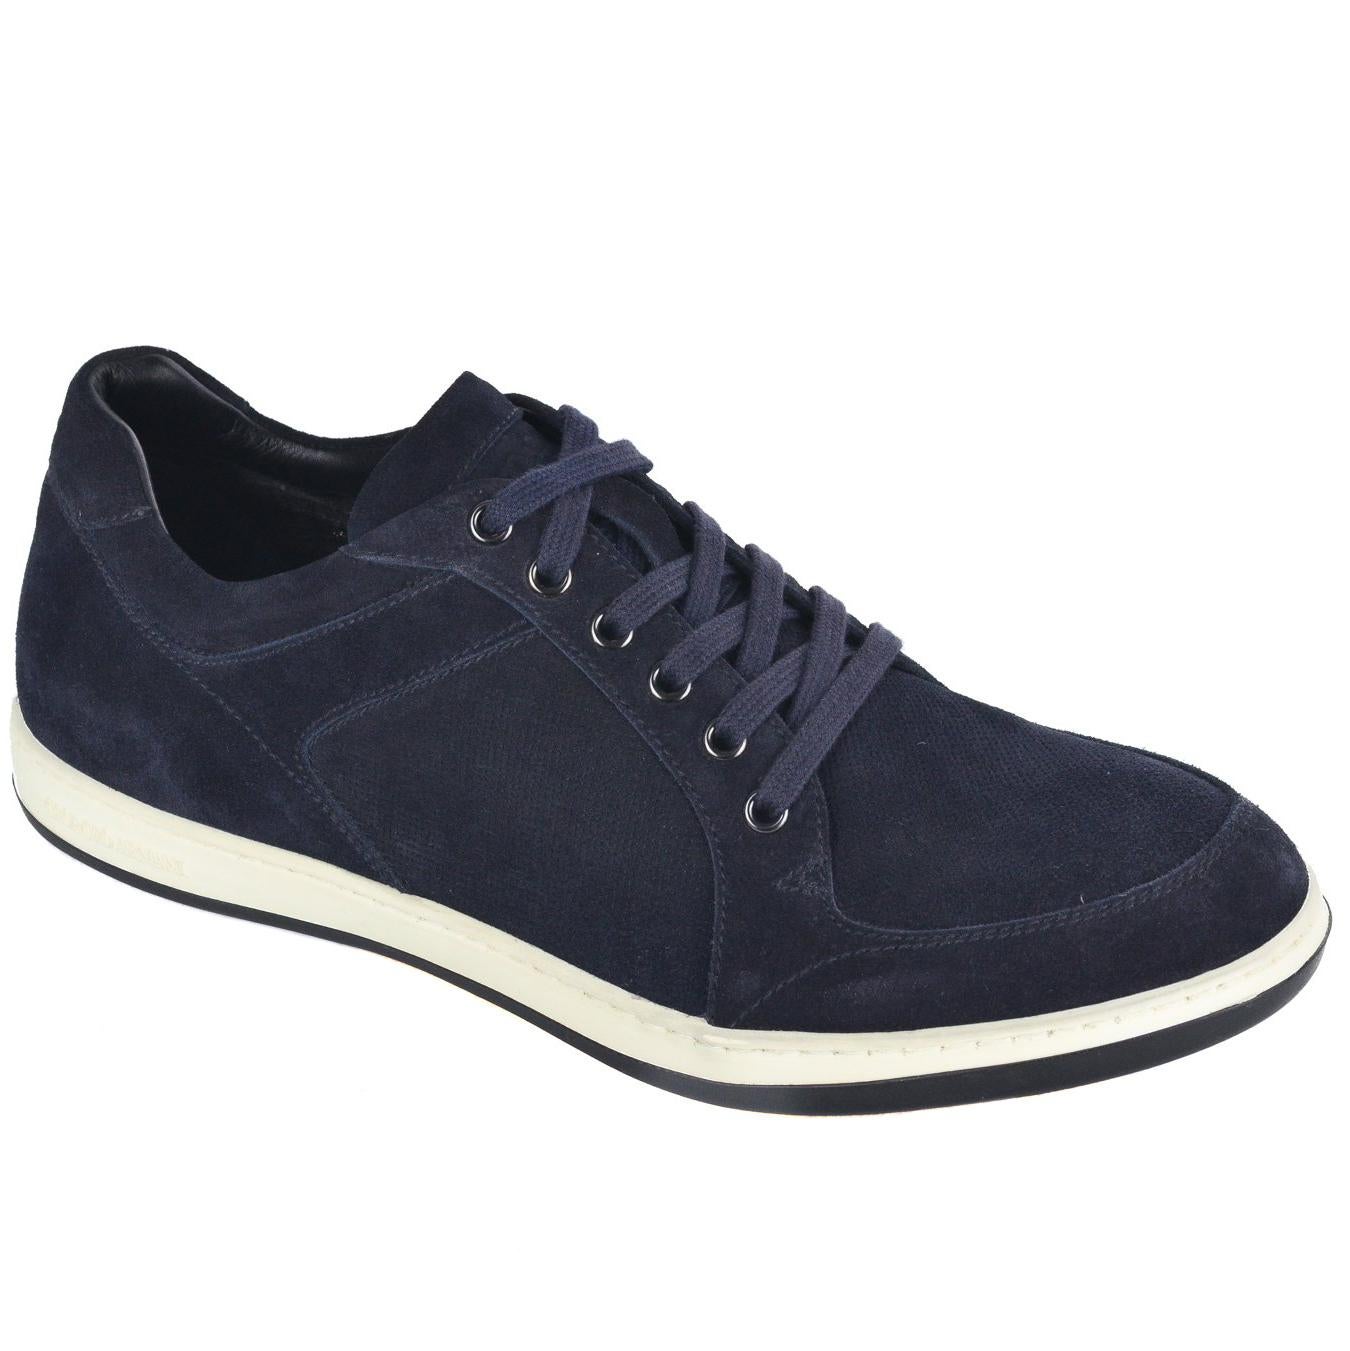 Giorgio Armani Mens Navy Blue Suede Lace Up Sneakers For Sale